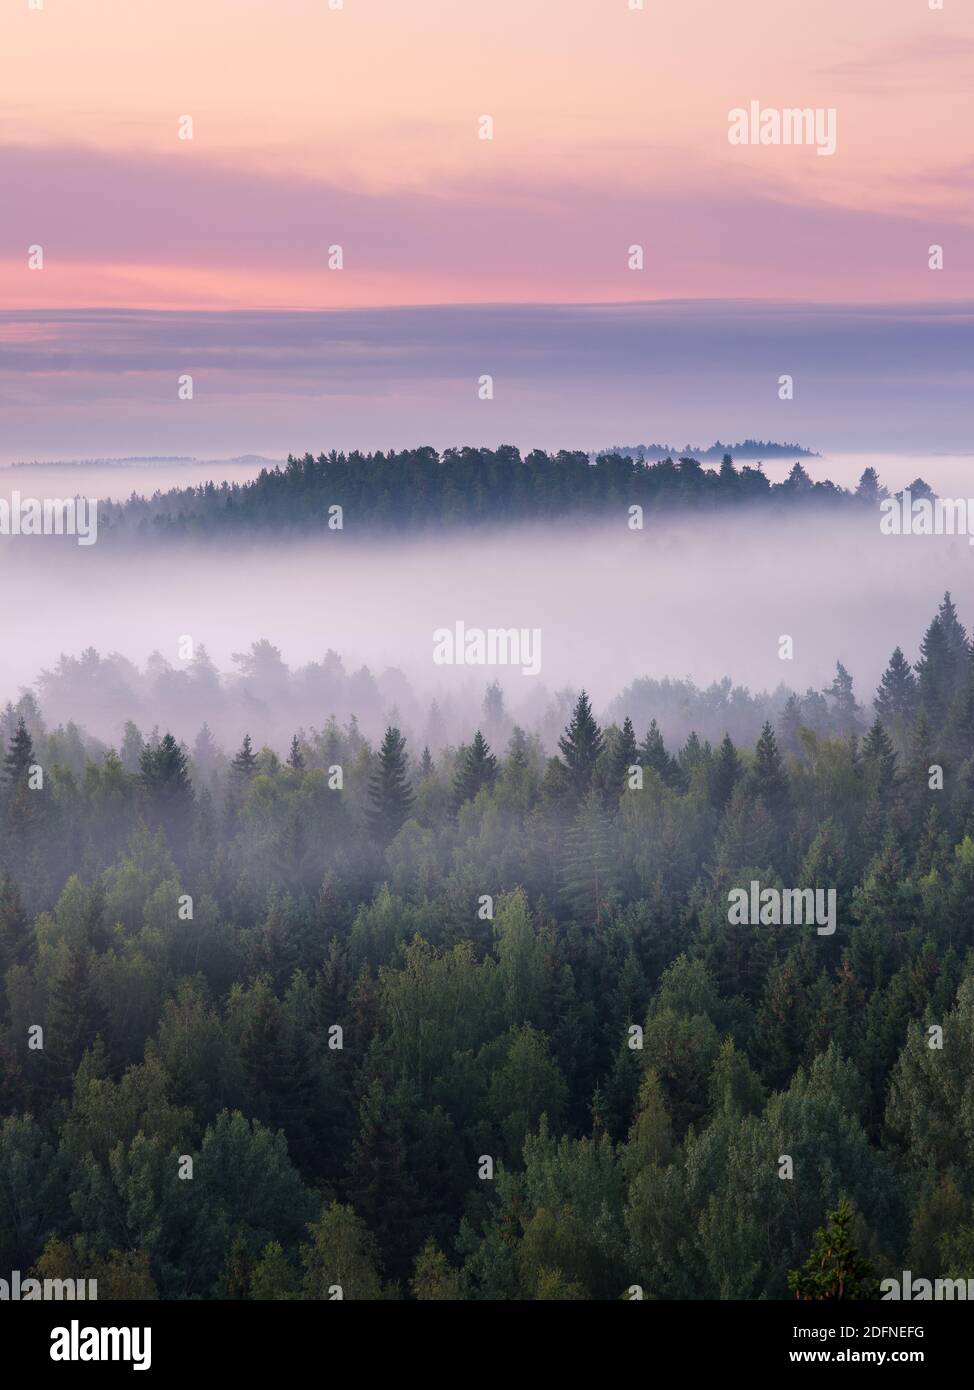 Scenic foggy landscape with mood forest at summer morning at National park, Finland. High angle aerial view. Stock Photo